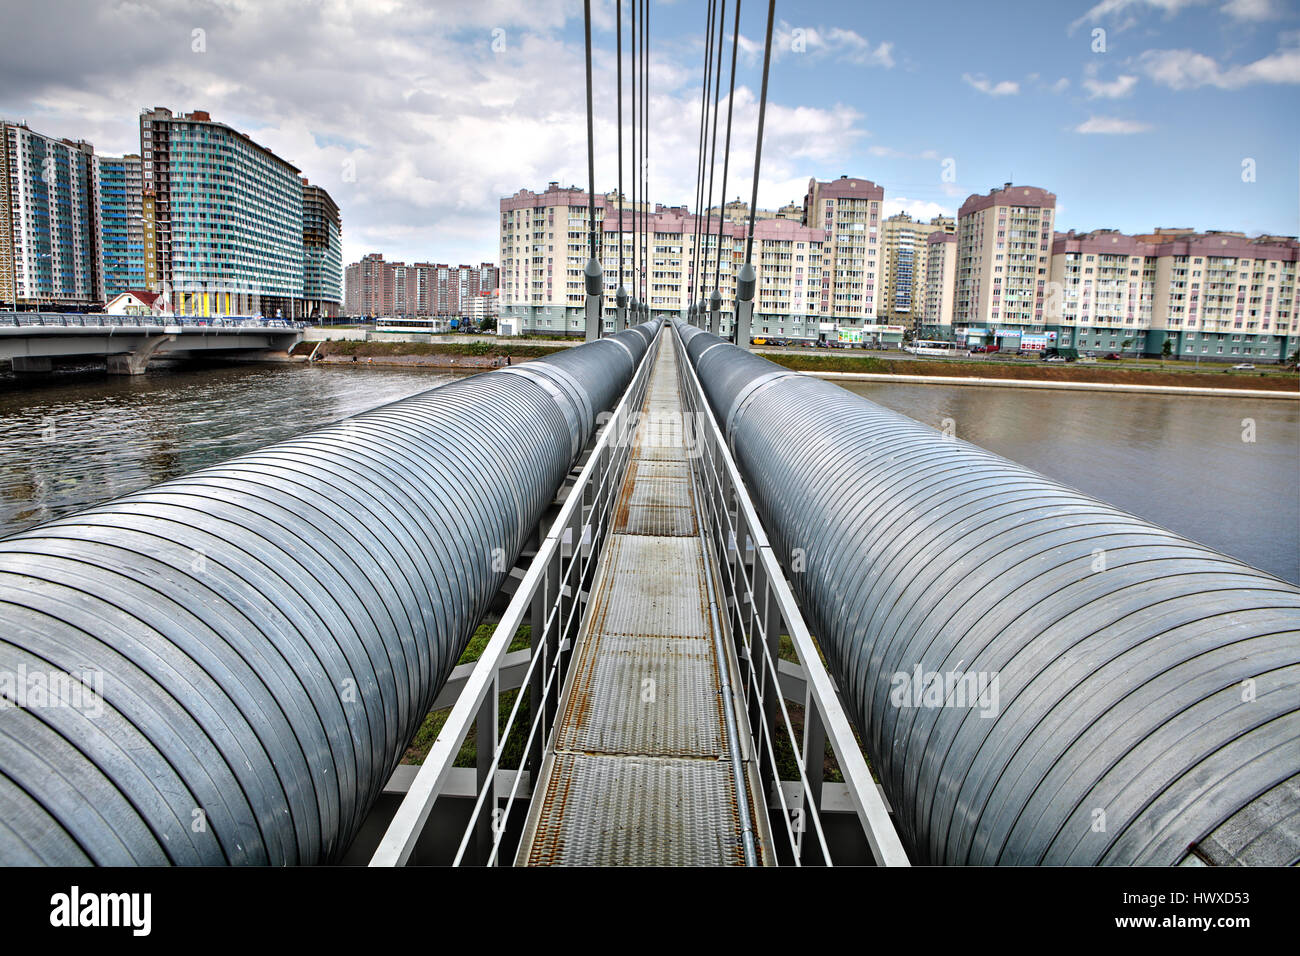 St. Petersburg, Russia - July 9, 2015: Heating duct hot water supply, cable-stayed bridge pipeline over river. Stock Photo